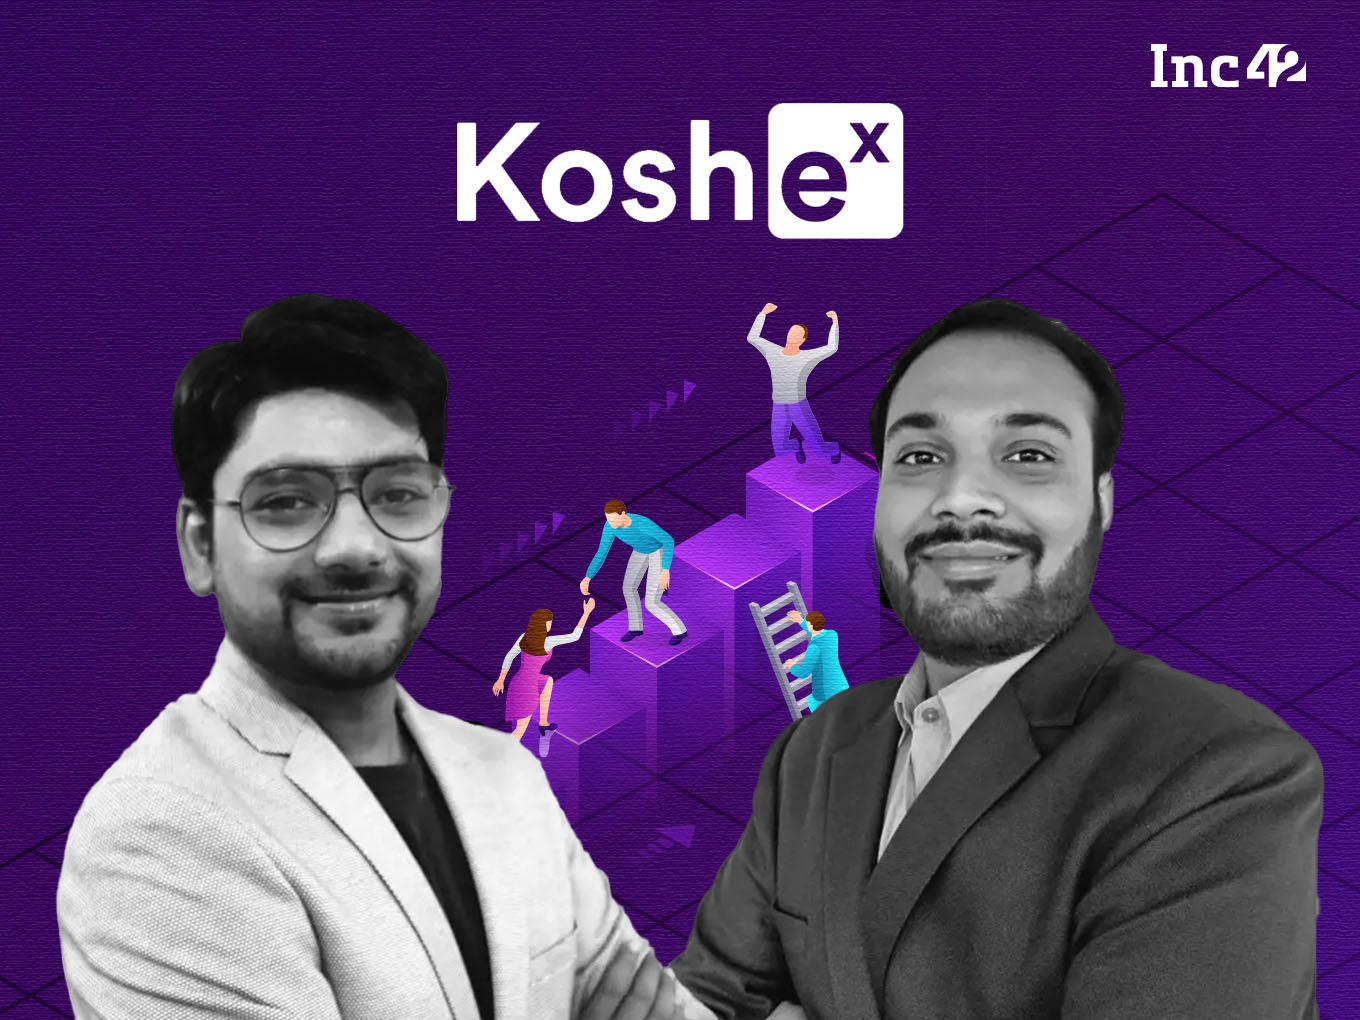 Automating Wealth Creation Via Personalised Investment Baskets - Here’s Koshex’s Story